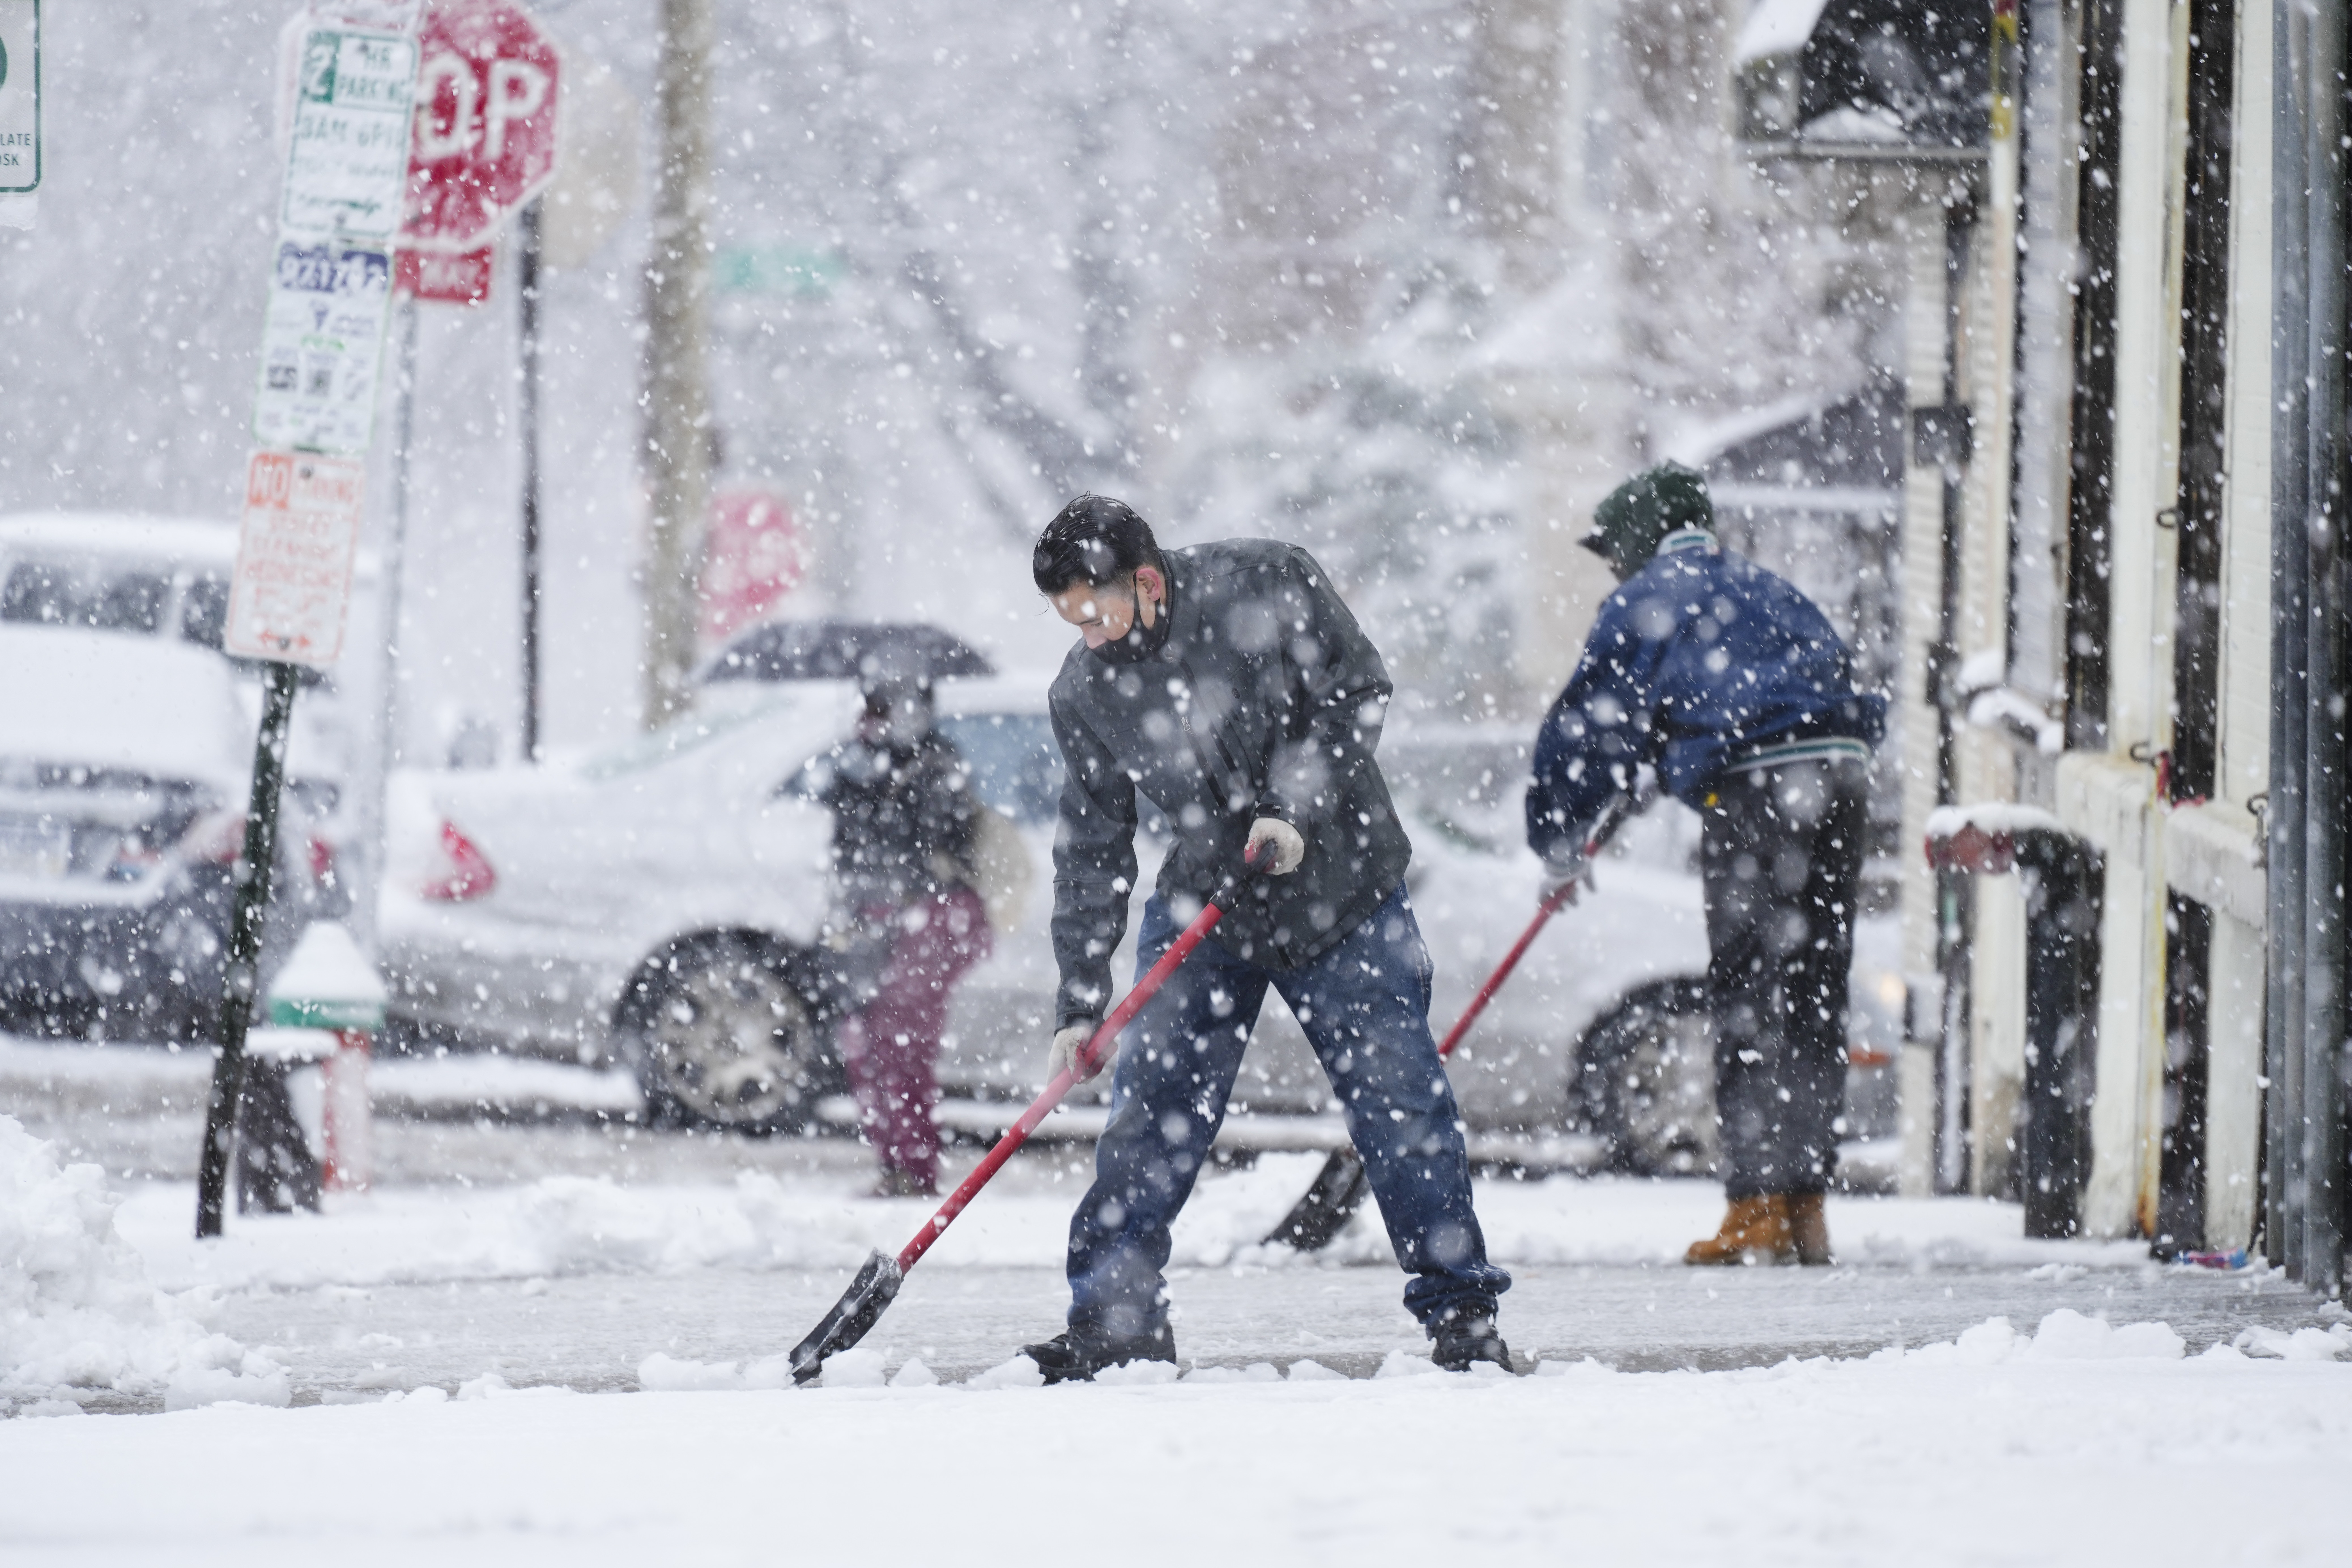 Quick-moving winter storm brings snow to Northeast, disrupting